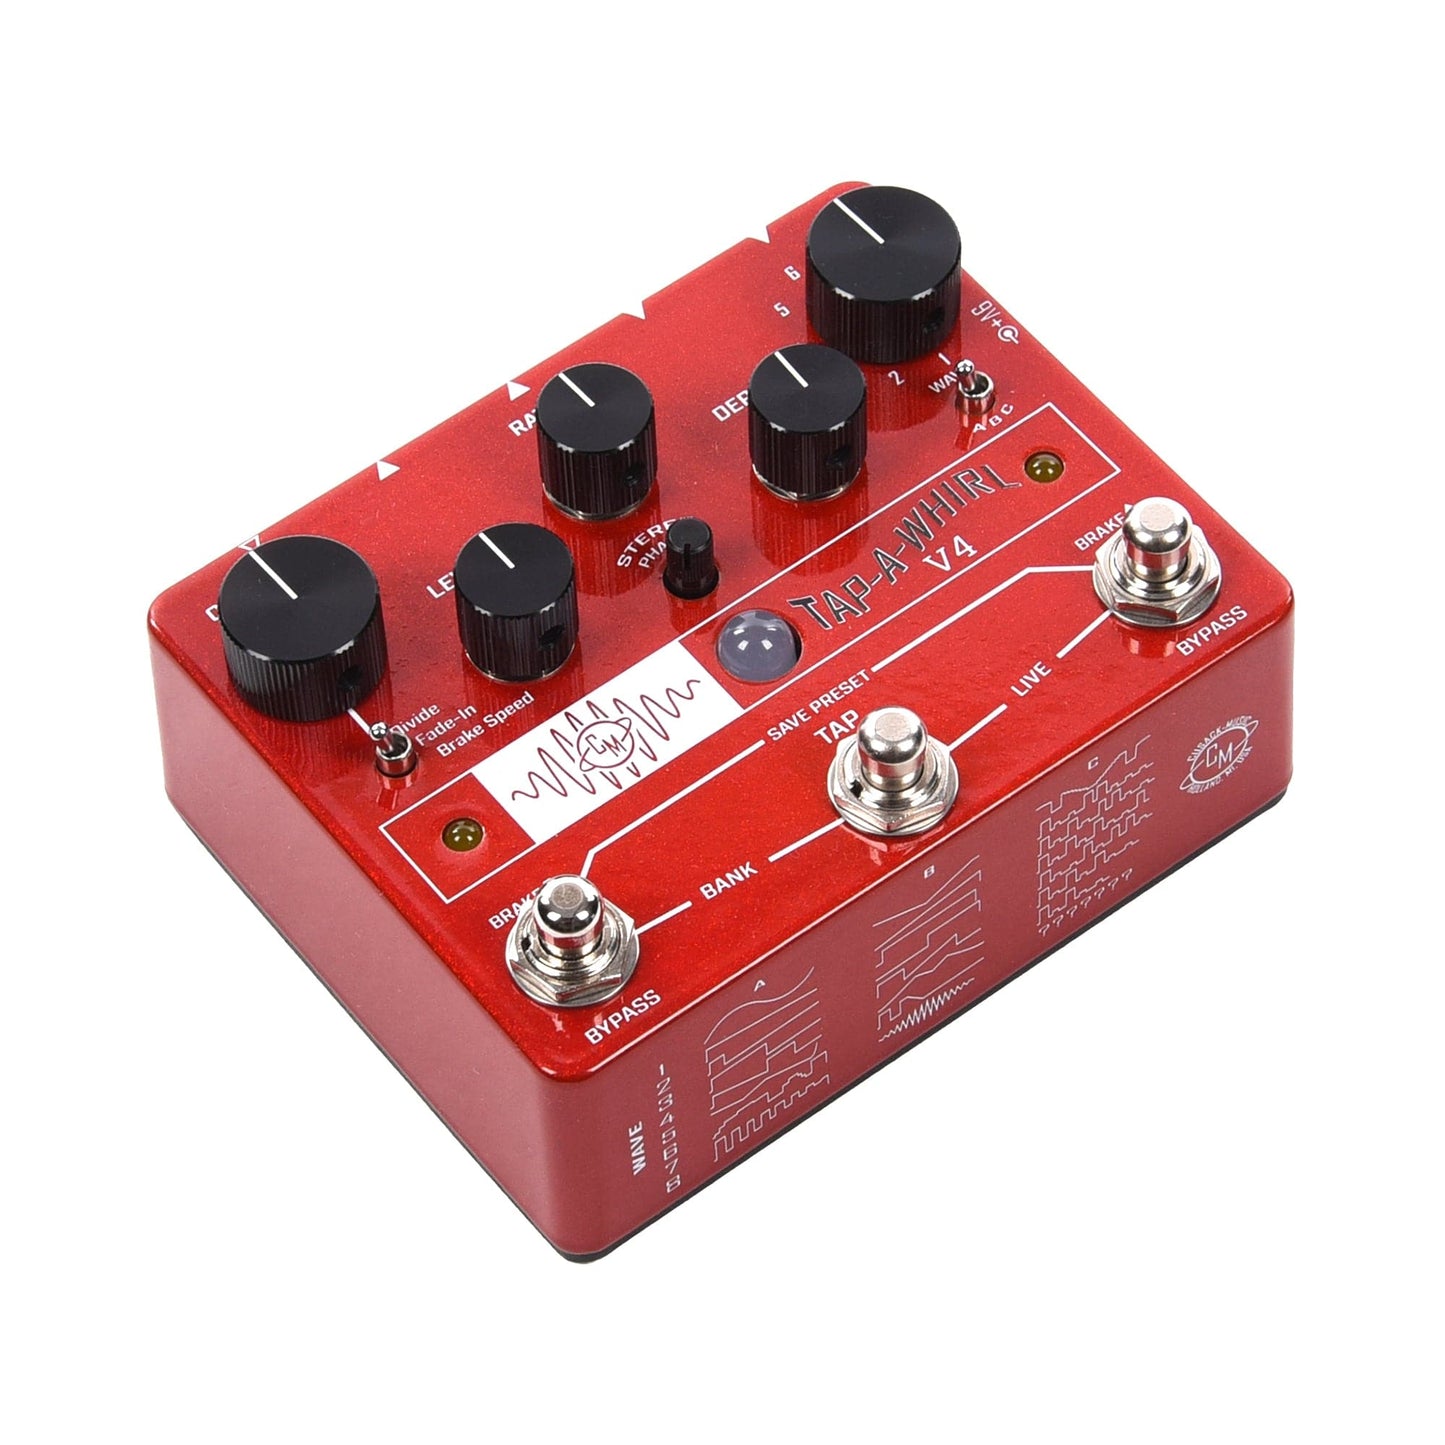 Cusack Music Tap-a-Whirl V4 Analog Tap Tempo Tremolo Pedal Effects and Pedals / Tremolo